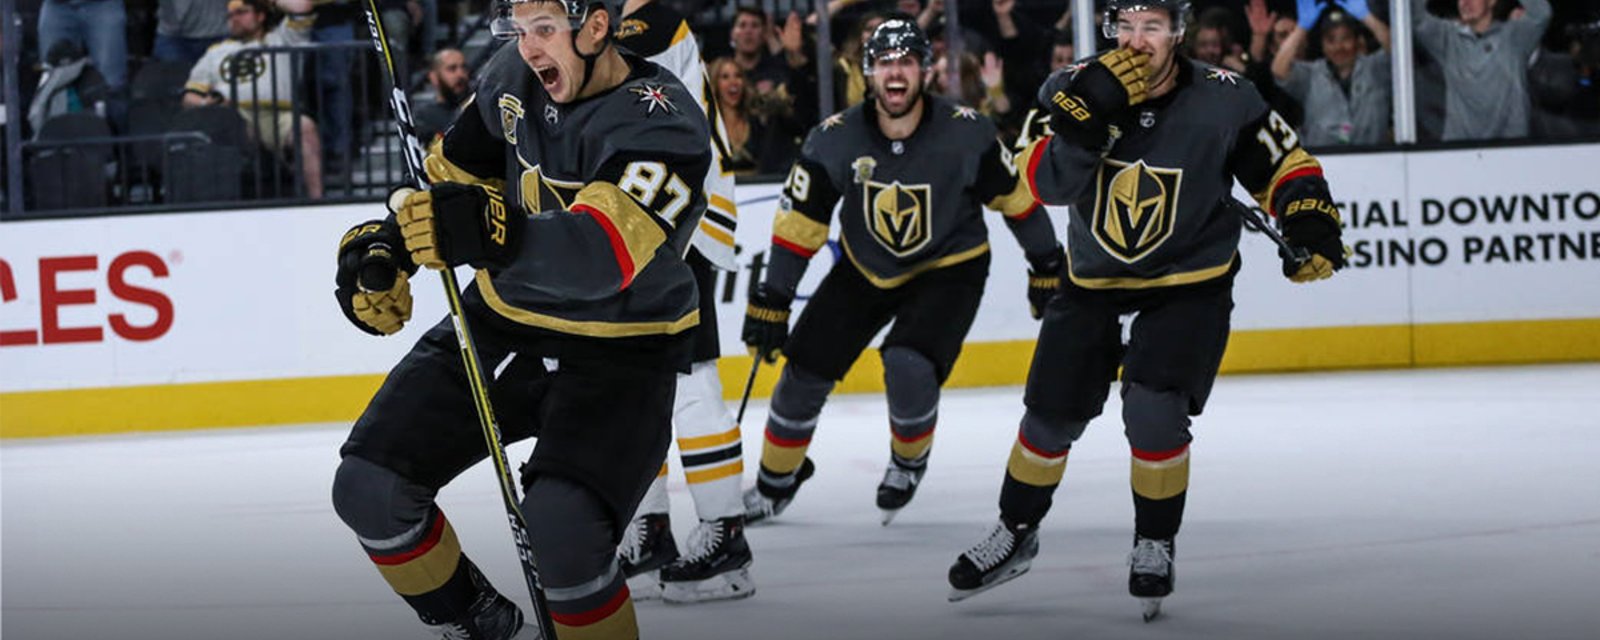 Report: It’s all over between Shipachyov and Vegas